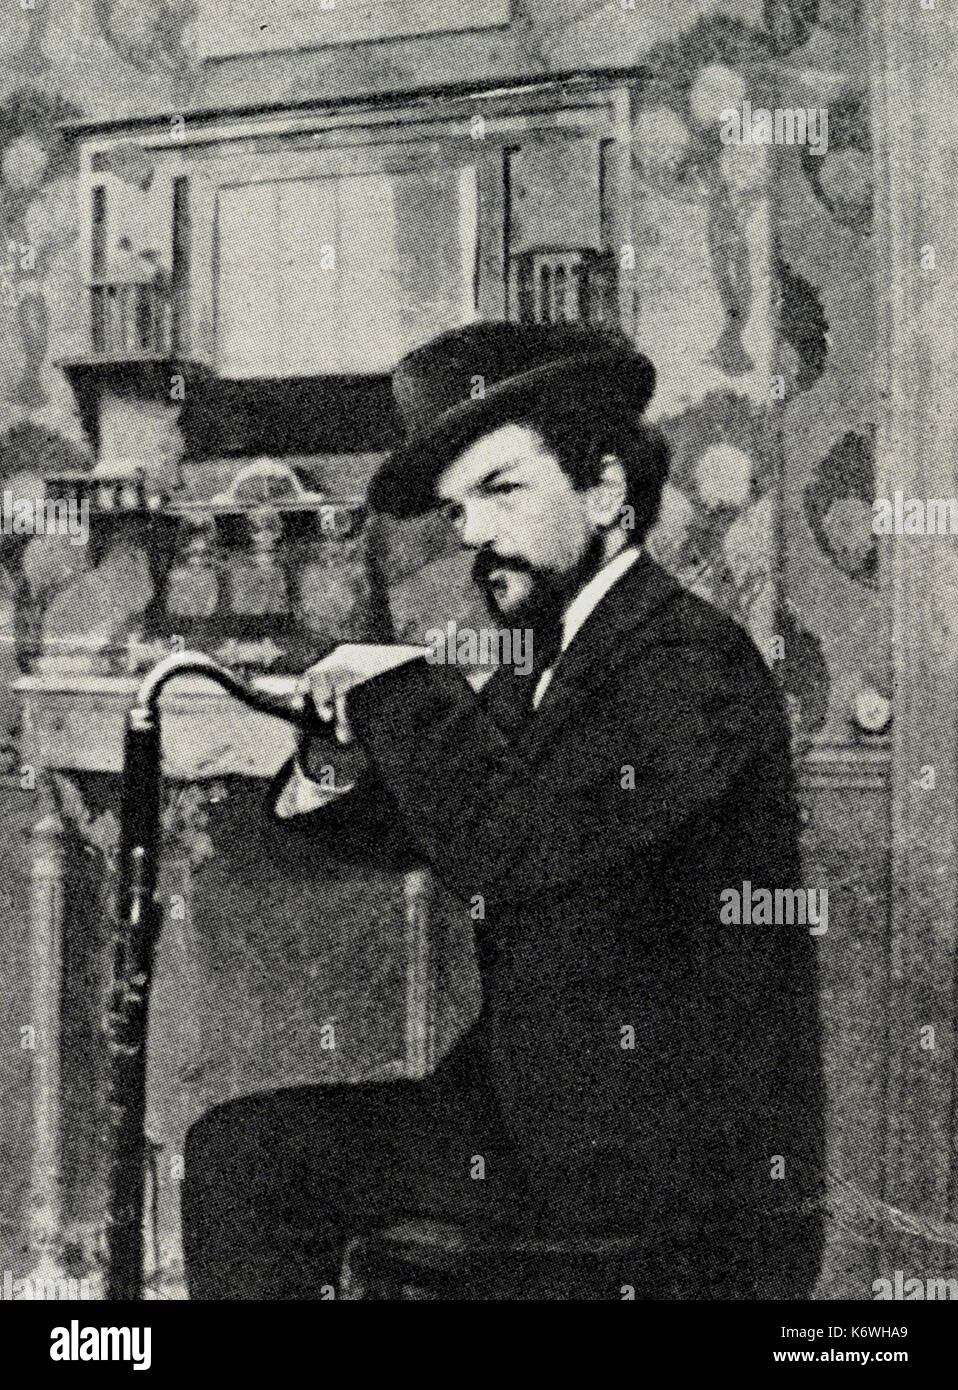 DEBUSSY, Claude - in 1894 leaning on Bass Clarinet.  Time of 'Prélude à l'Après-Midi' d'un Faune. French composer (1862-1918) Stock Photo